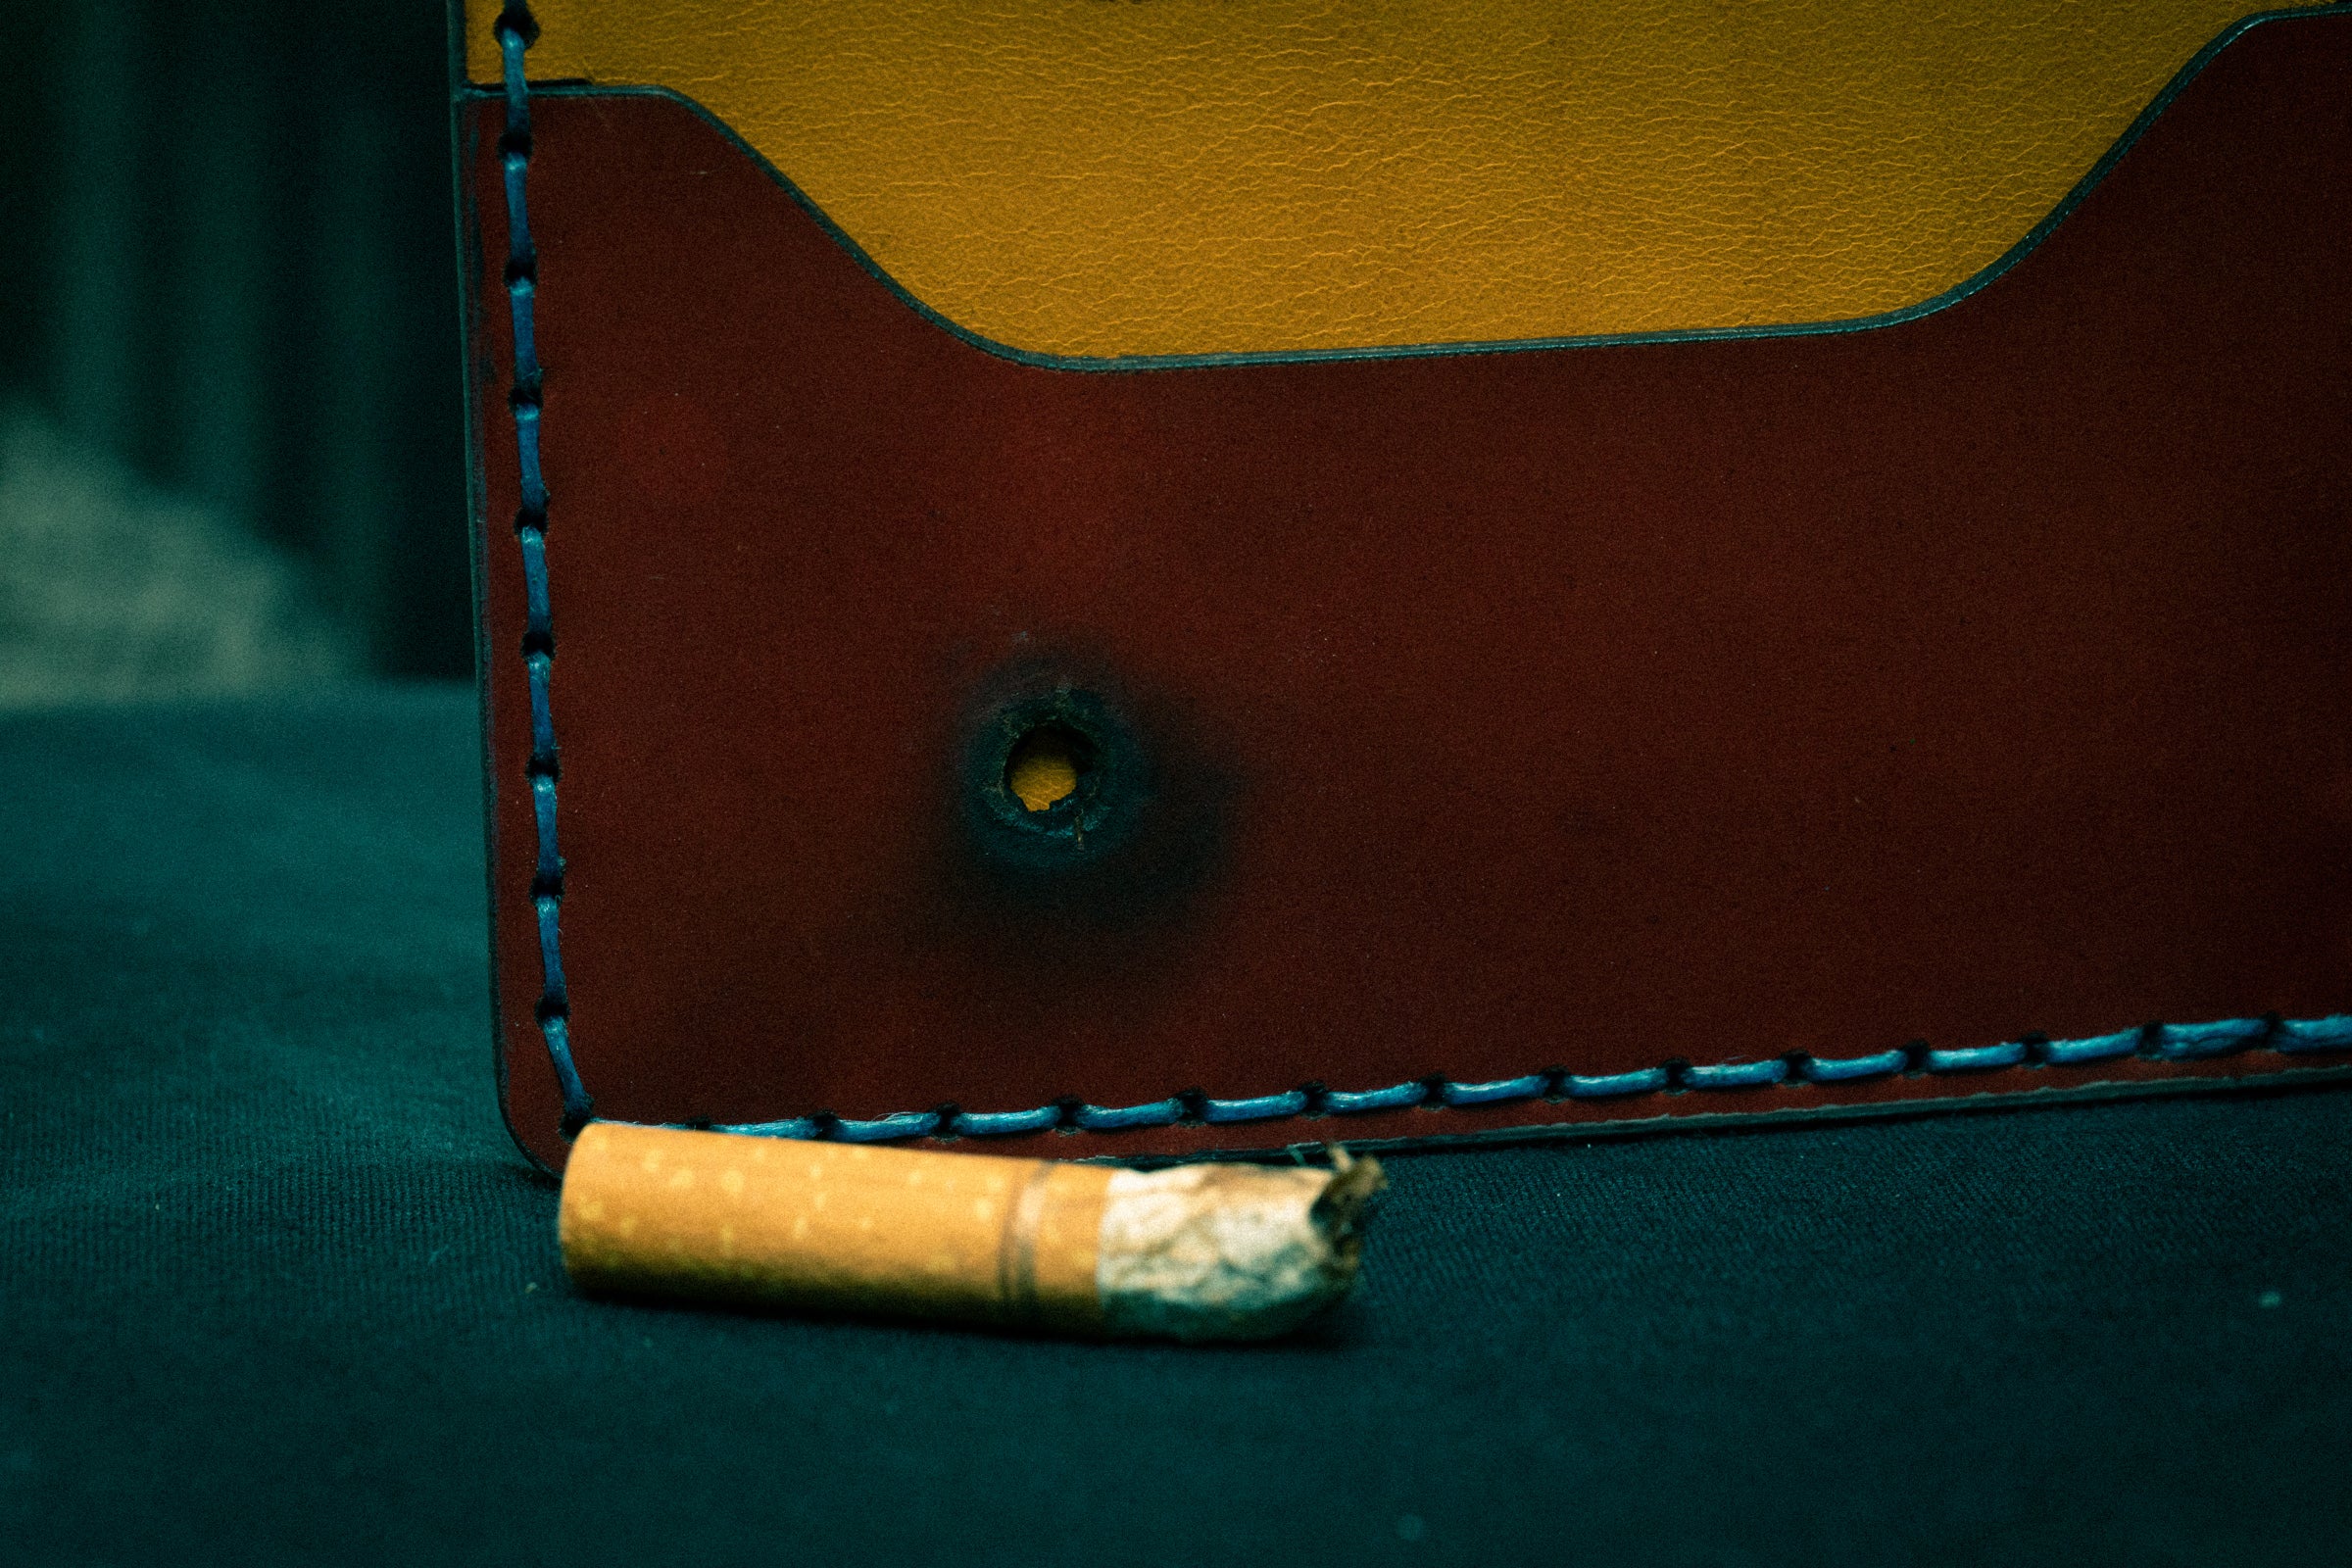 A close up of a maroon pocket of a wallet displays a circular burn hole mark from a cigarette that sits in front